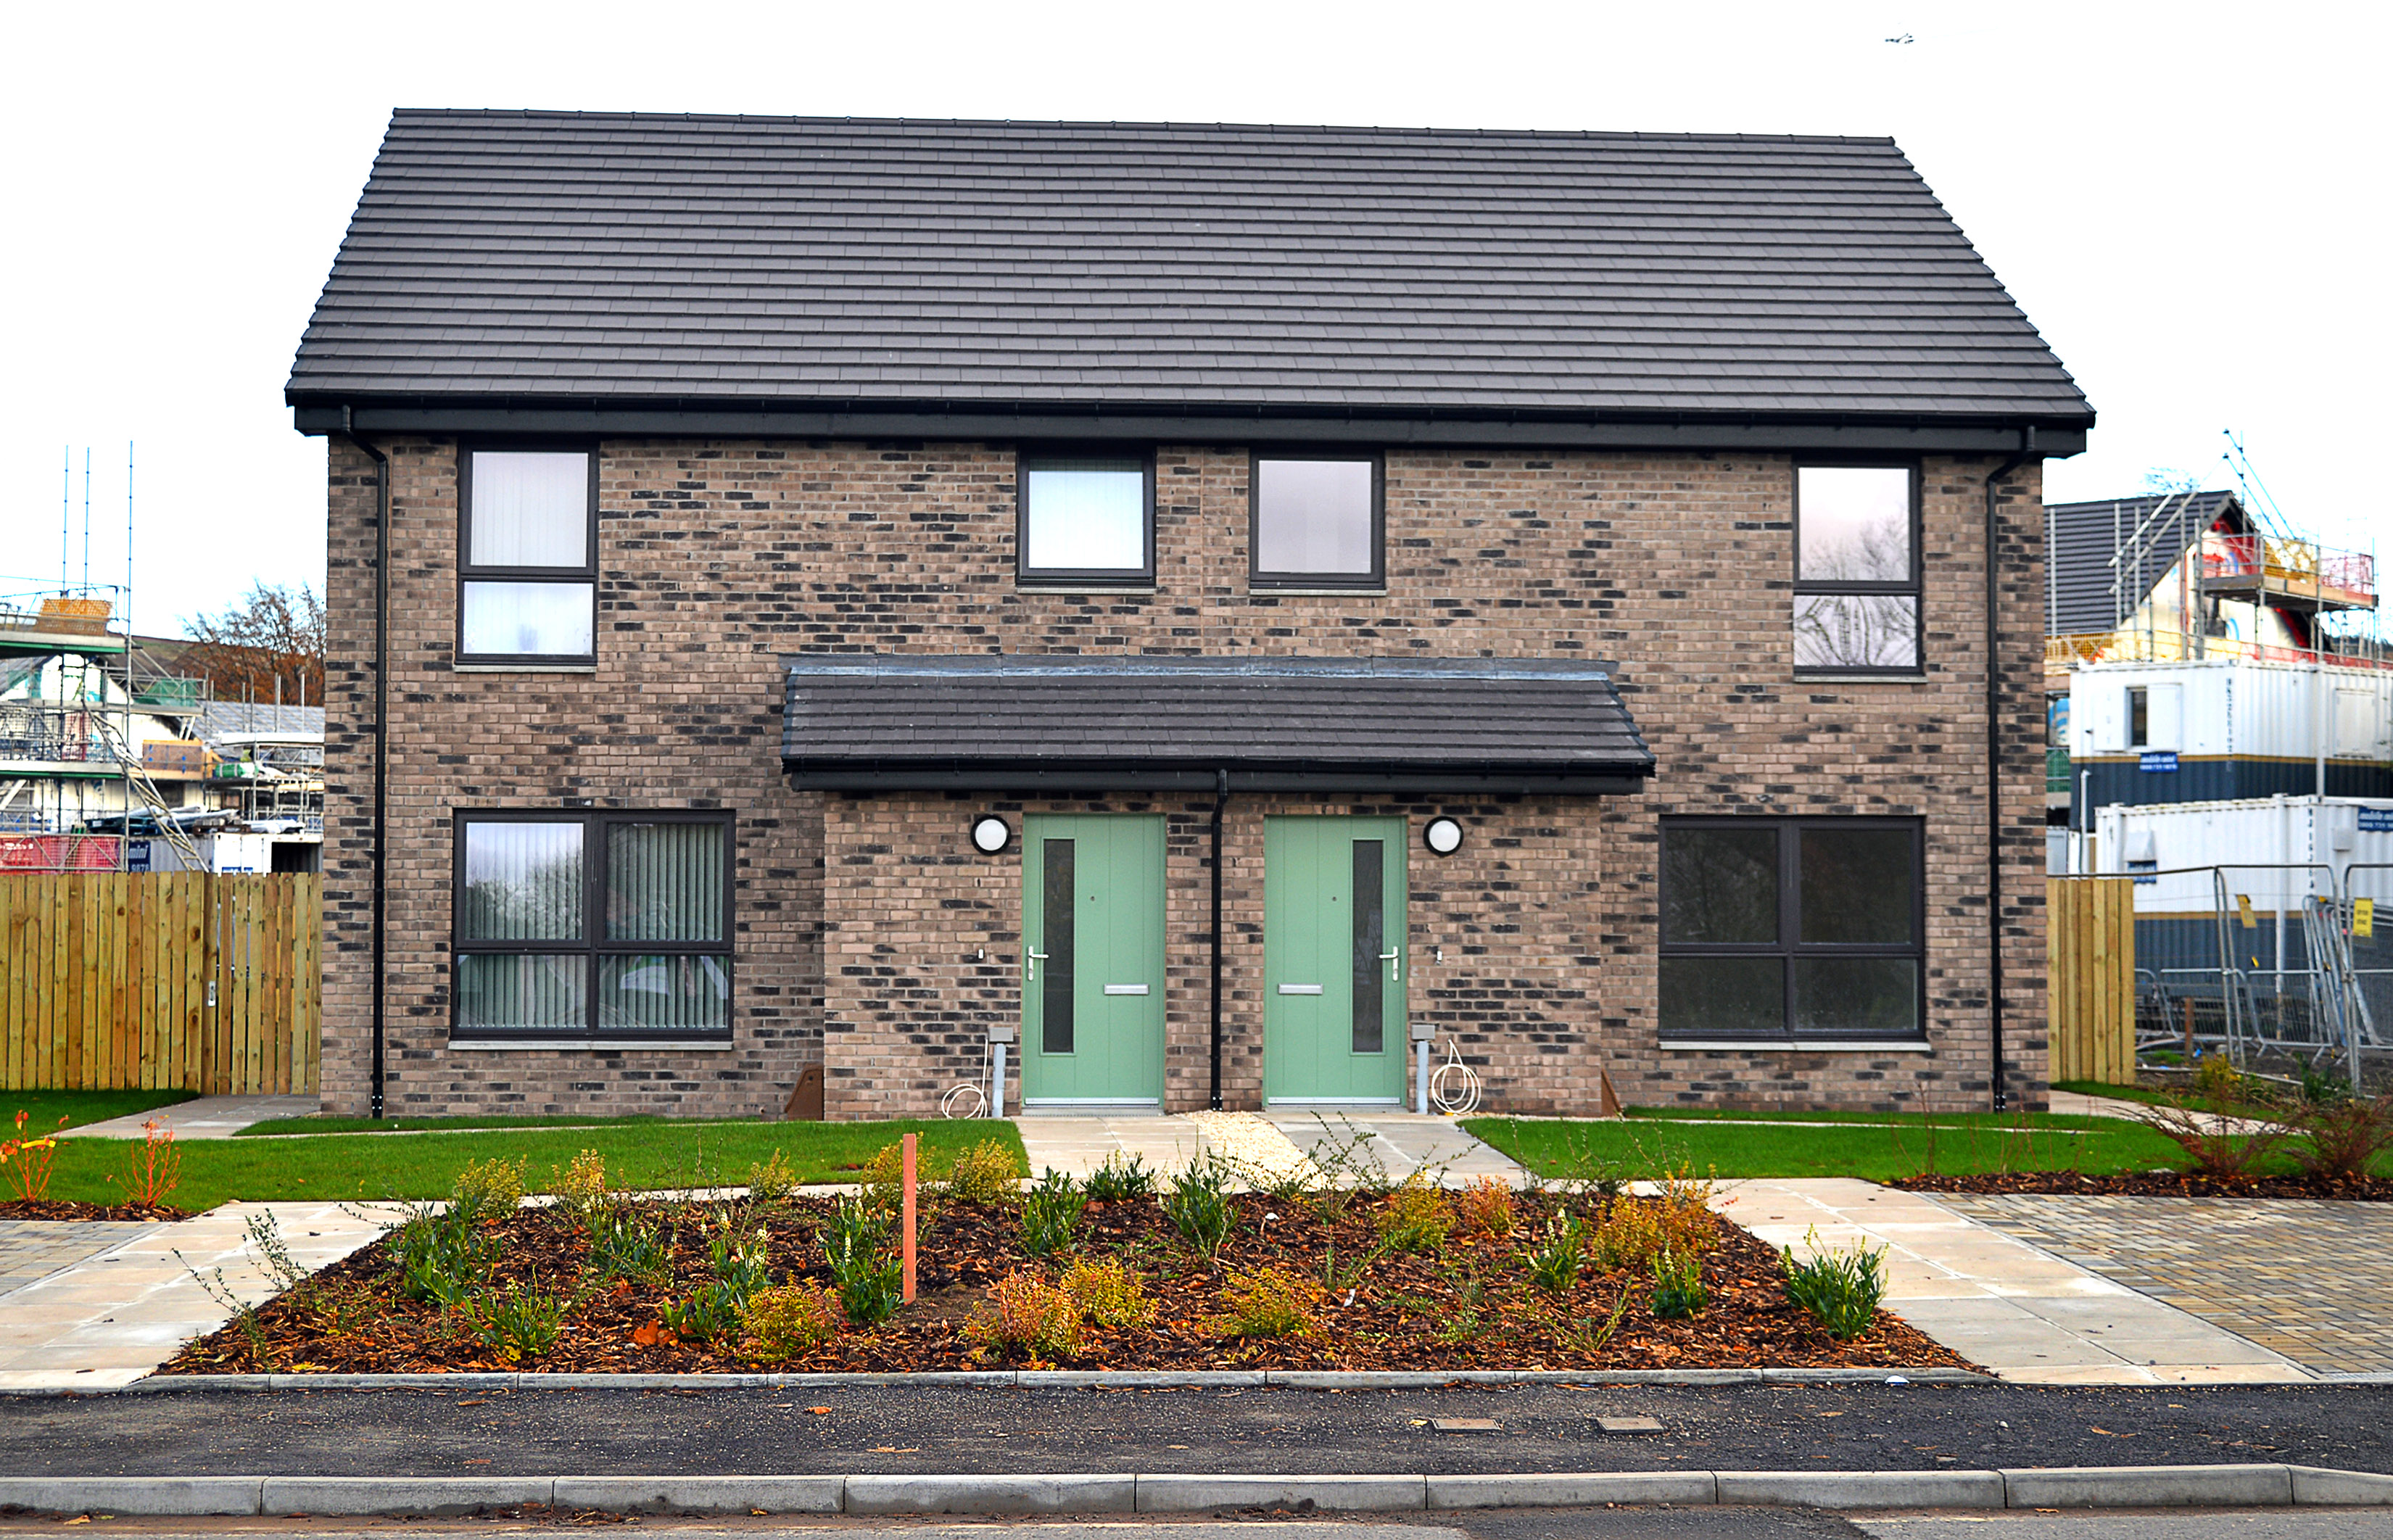 West Dunbartonshire to speed up housing buy back scheme with new appointment